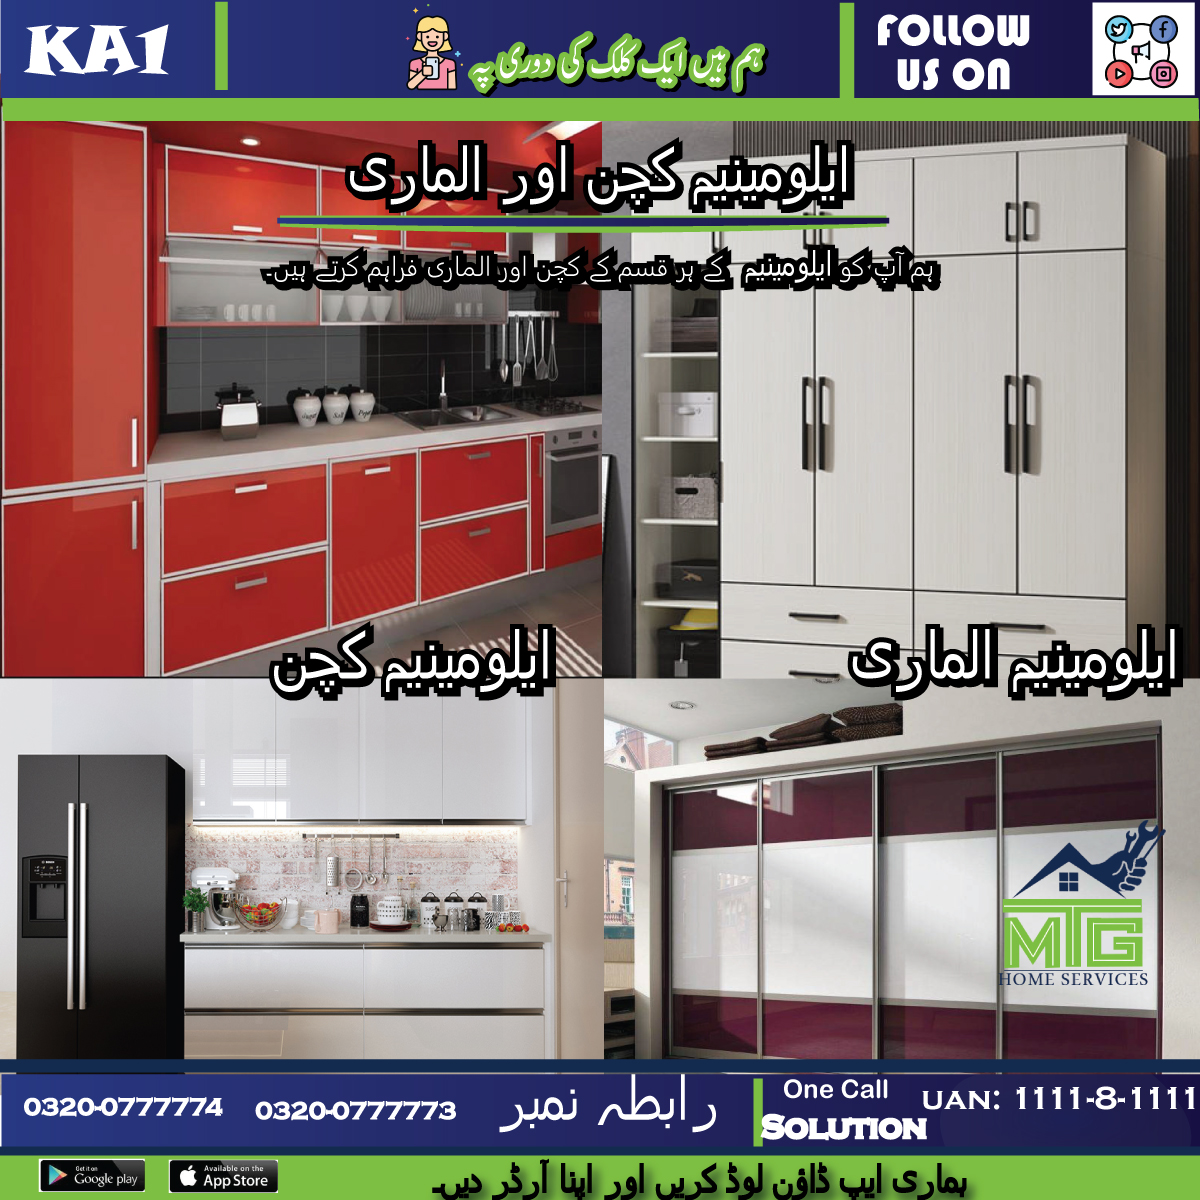 Aluminium Kitchens of your choice avail now!!

#mtghomeservices #aluminium #aluminiumkitchen #aluminiumkitchencabinet #services #maintenance